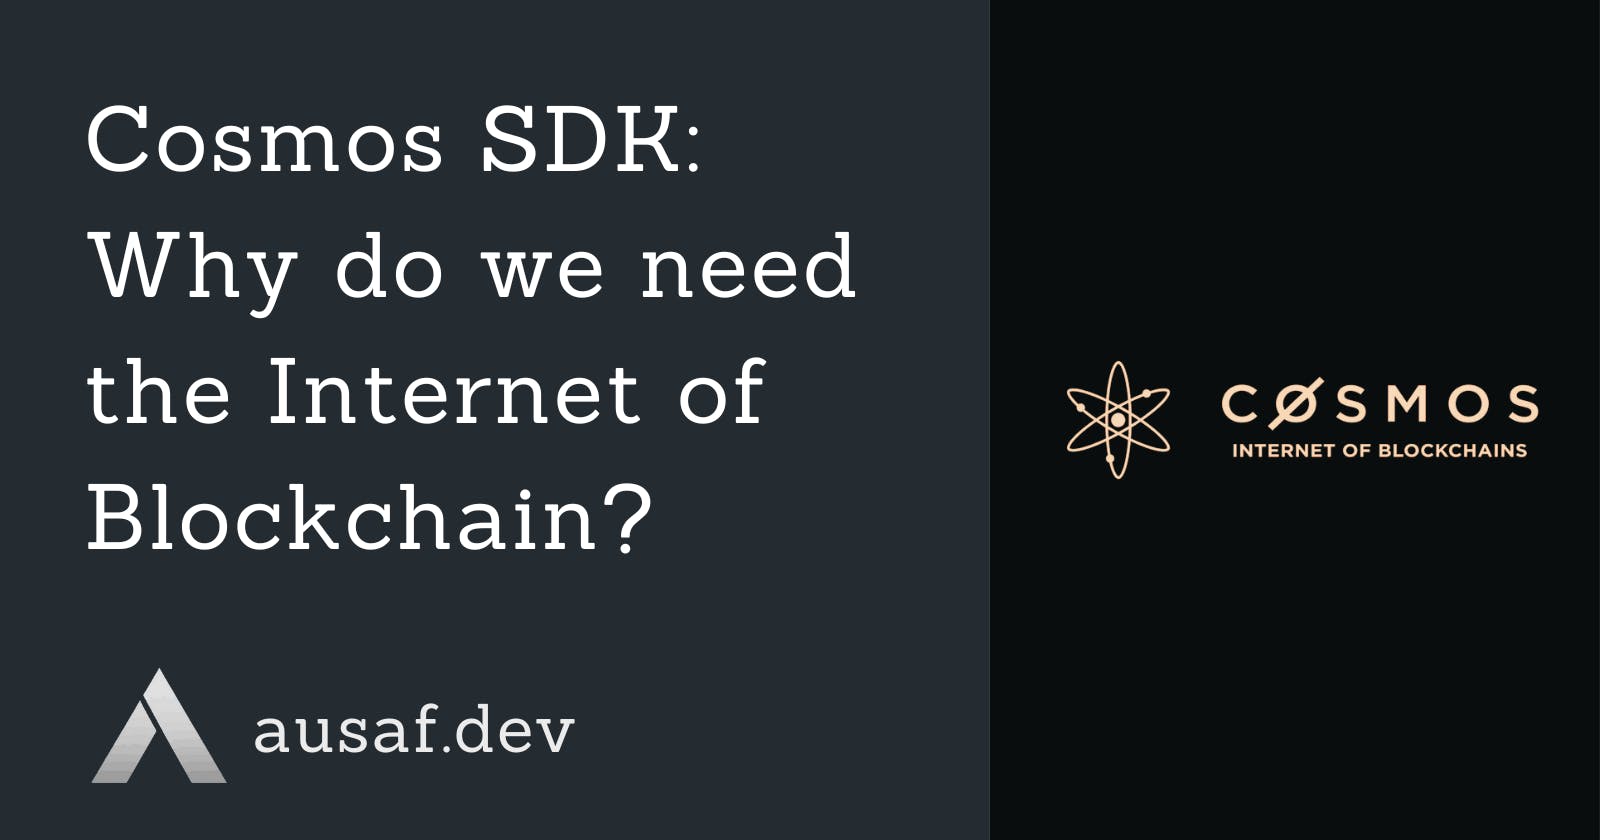 Cosmos SDK: Why do we need the Internet of Blockchain?